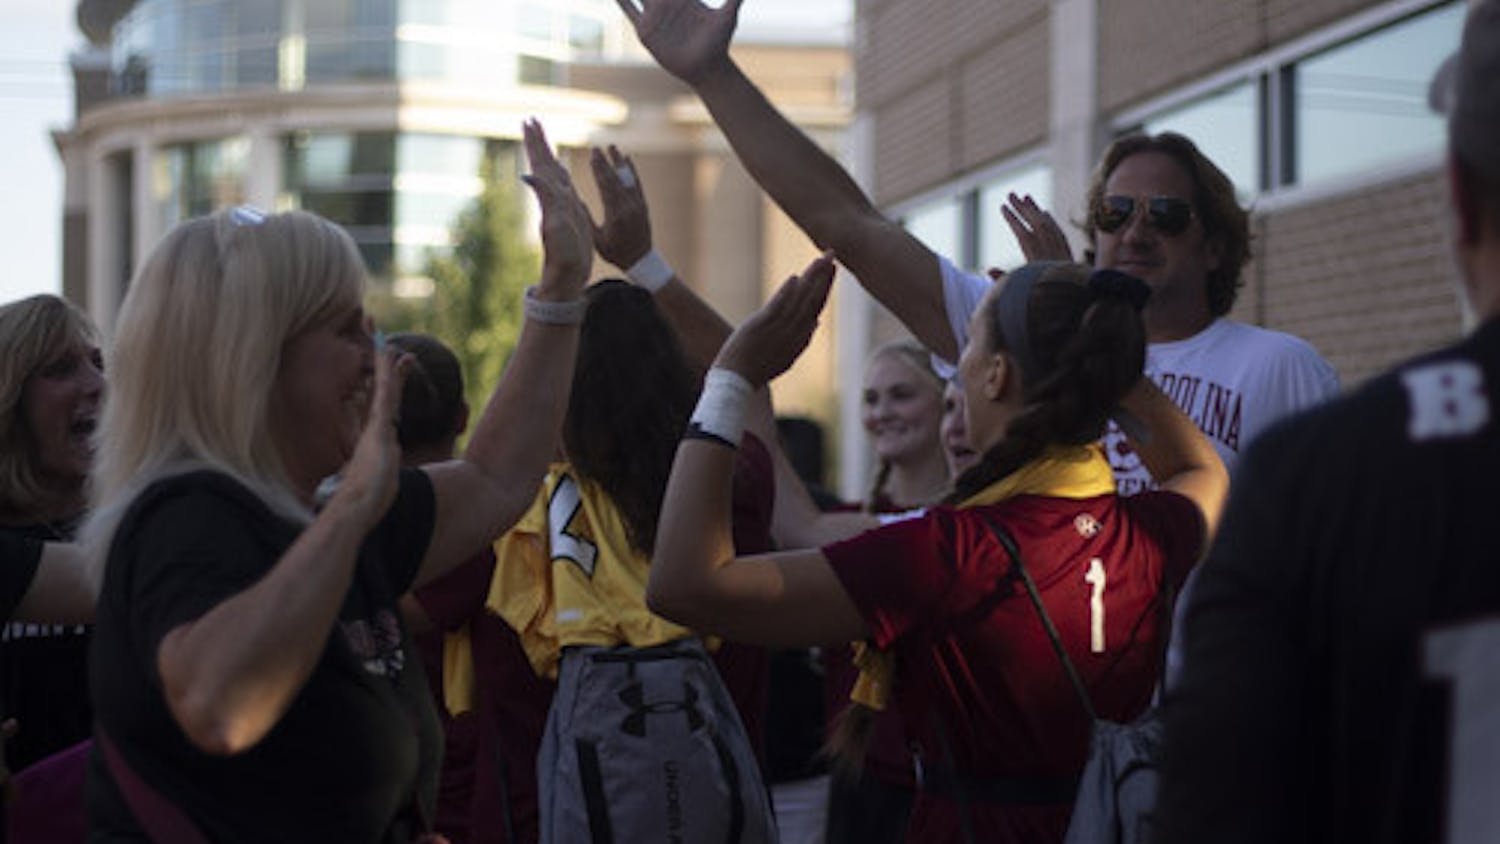 The South Carolina women’s soccer team high-fives surrounding families at a tailgate on Sept. 24, 2023. Families gathered to support the team before it took on Tennessee.